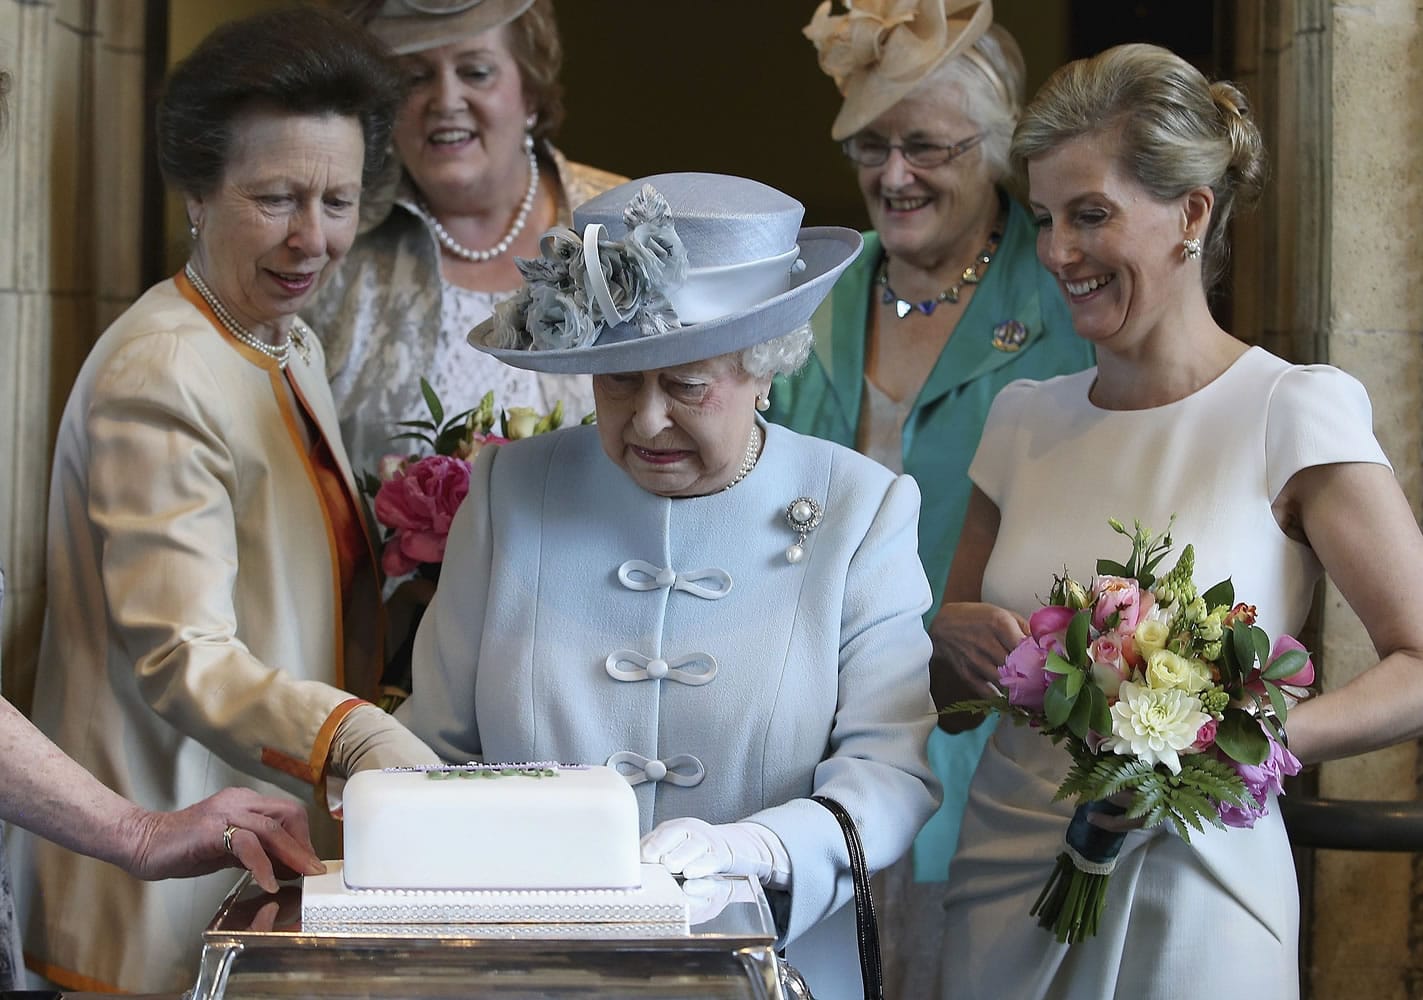 Britain's Sophie, Countess of Wessex, right, and Princess Anne, left, look on as Queen Elizabeth II, center, prepares to cut a Women's Institute Celebrating 100 Years cake Thursday at the Centenary Annual Meeting of The National Federation of Women's Institute at the Royal Albert Hall in London.